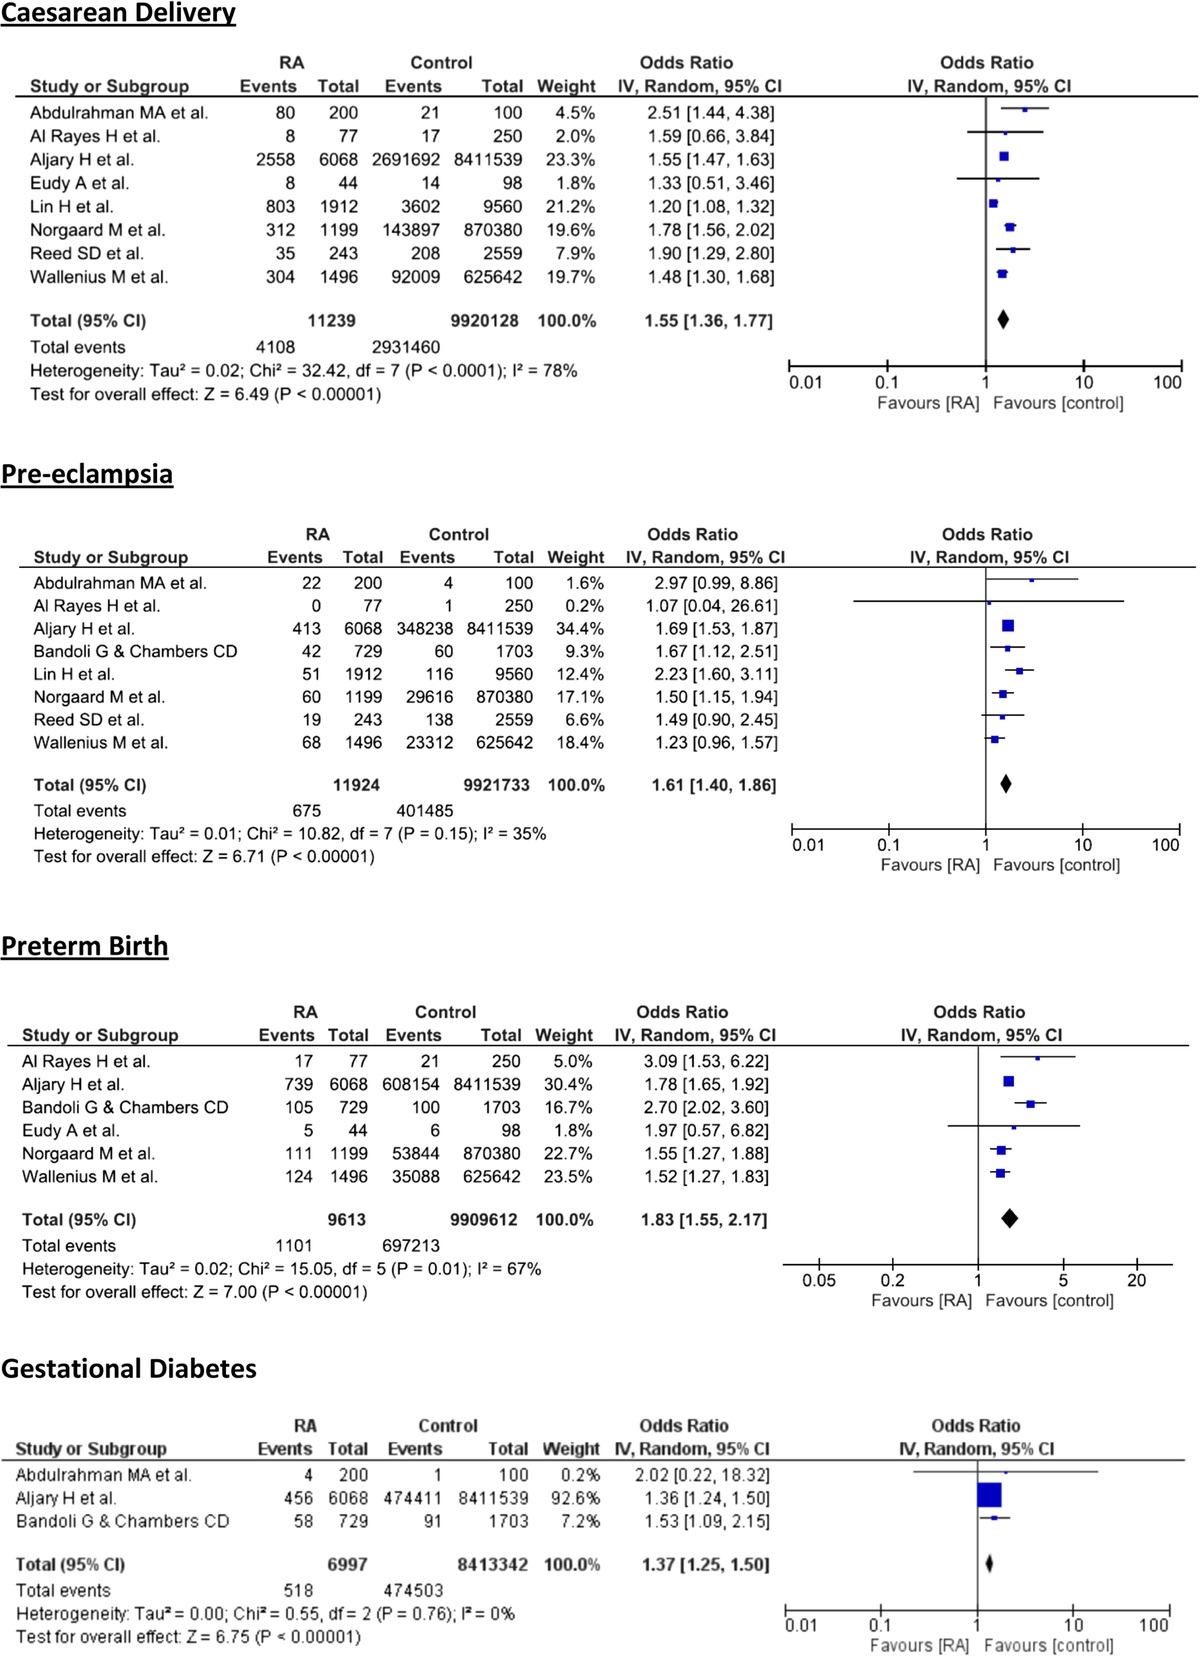 Pregnancy Outcomes in Women With Rheumatoid Arthritis: A Systematic Review and Meta-analysis